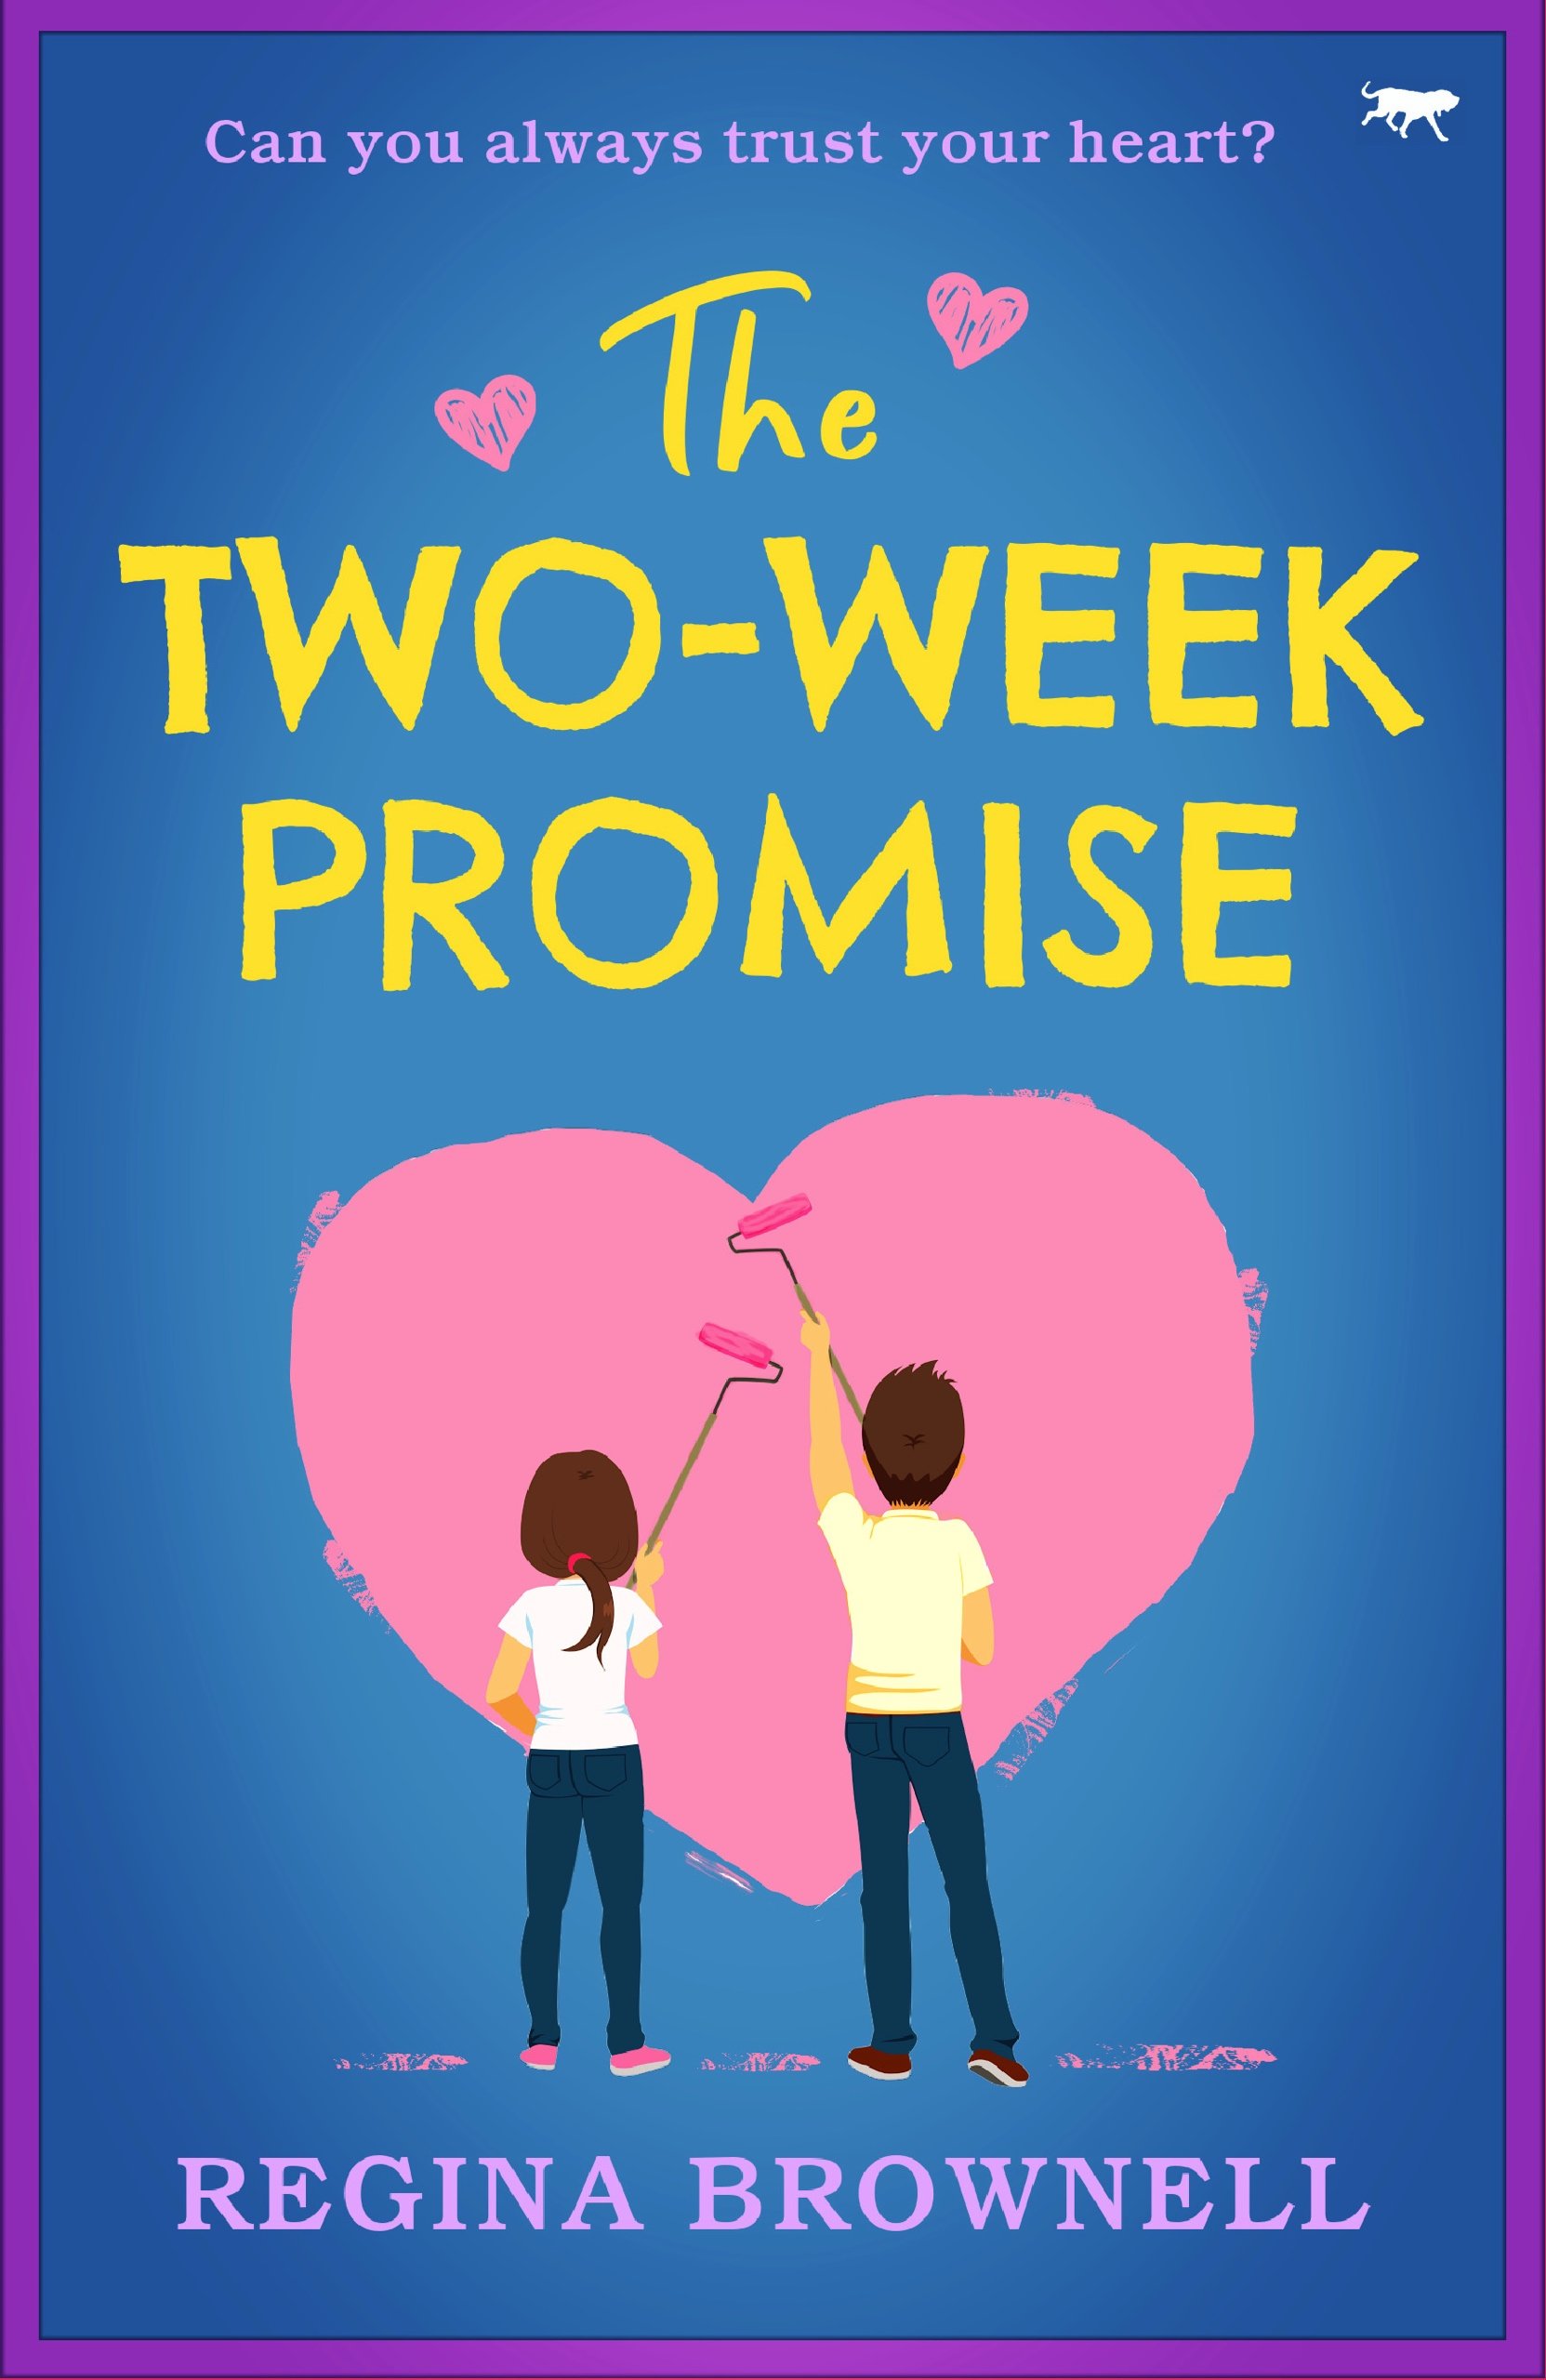 The-Two-Week-Promise-Kindle.jpg